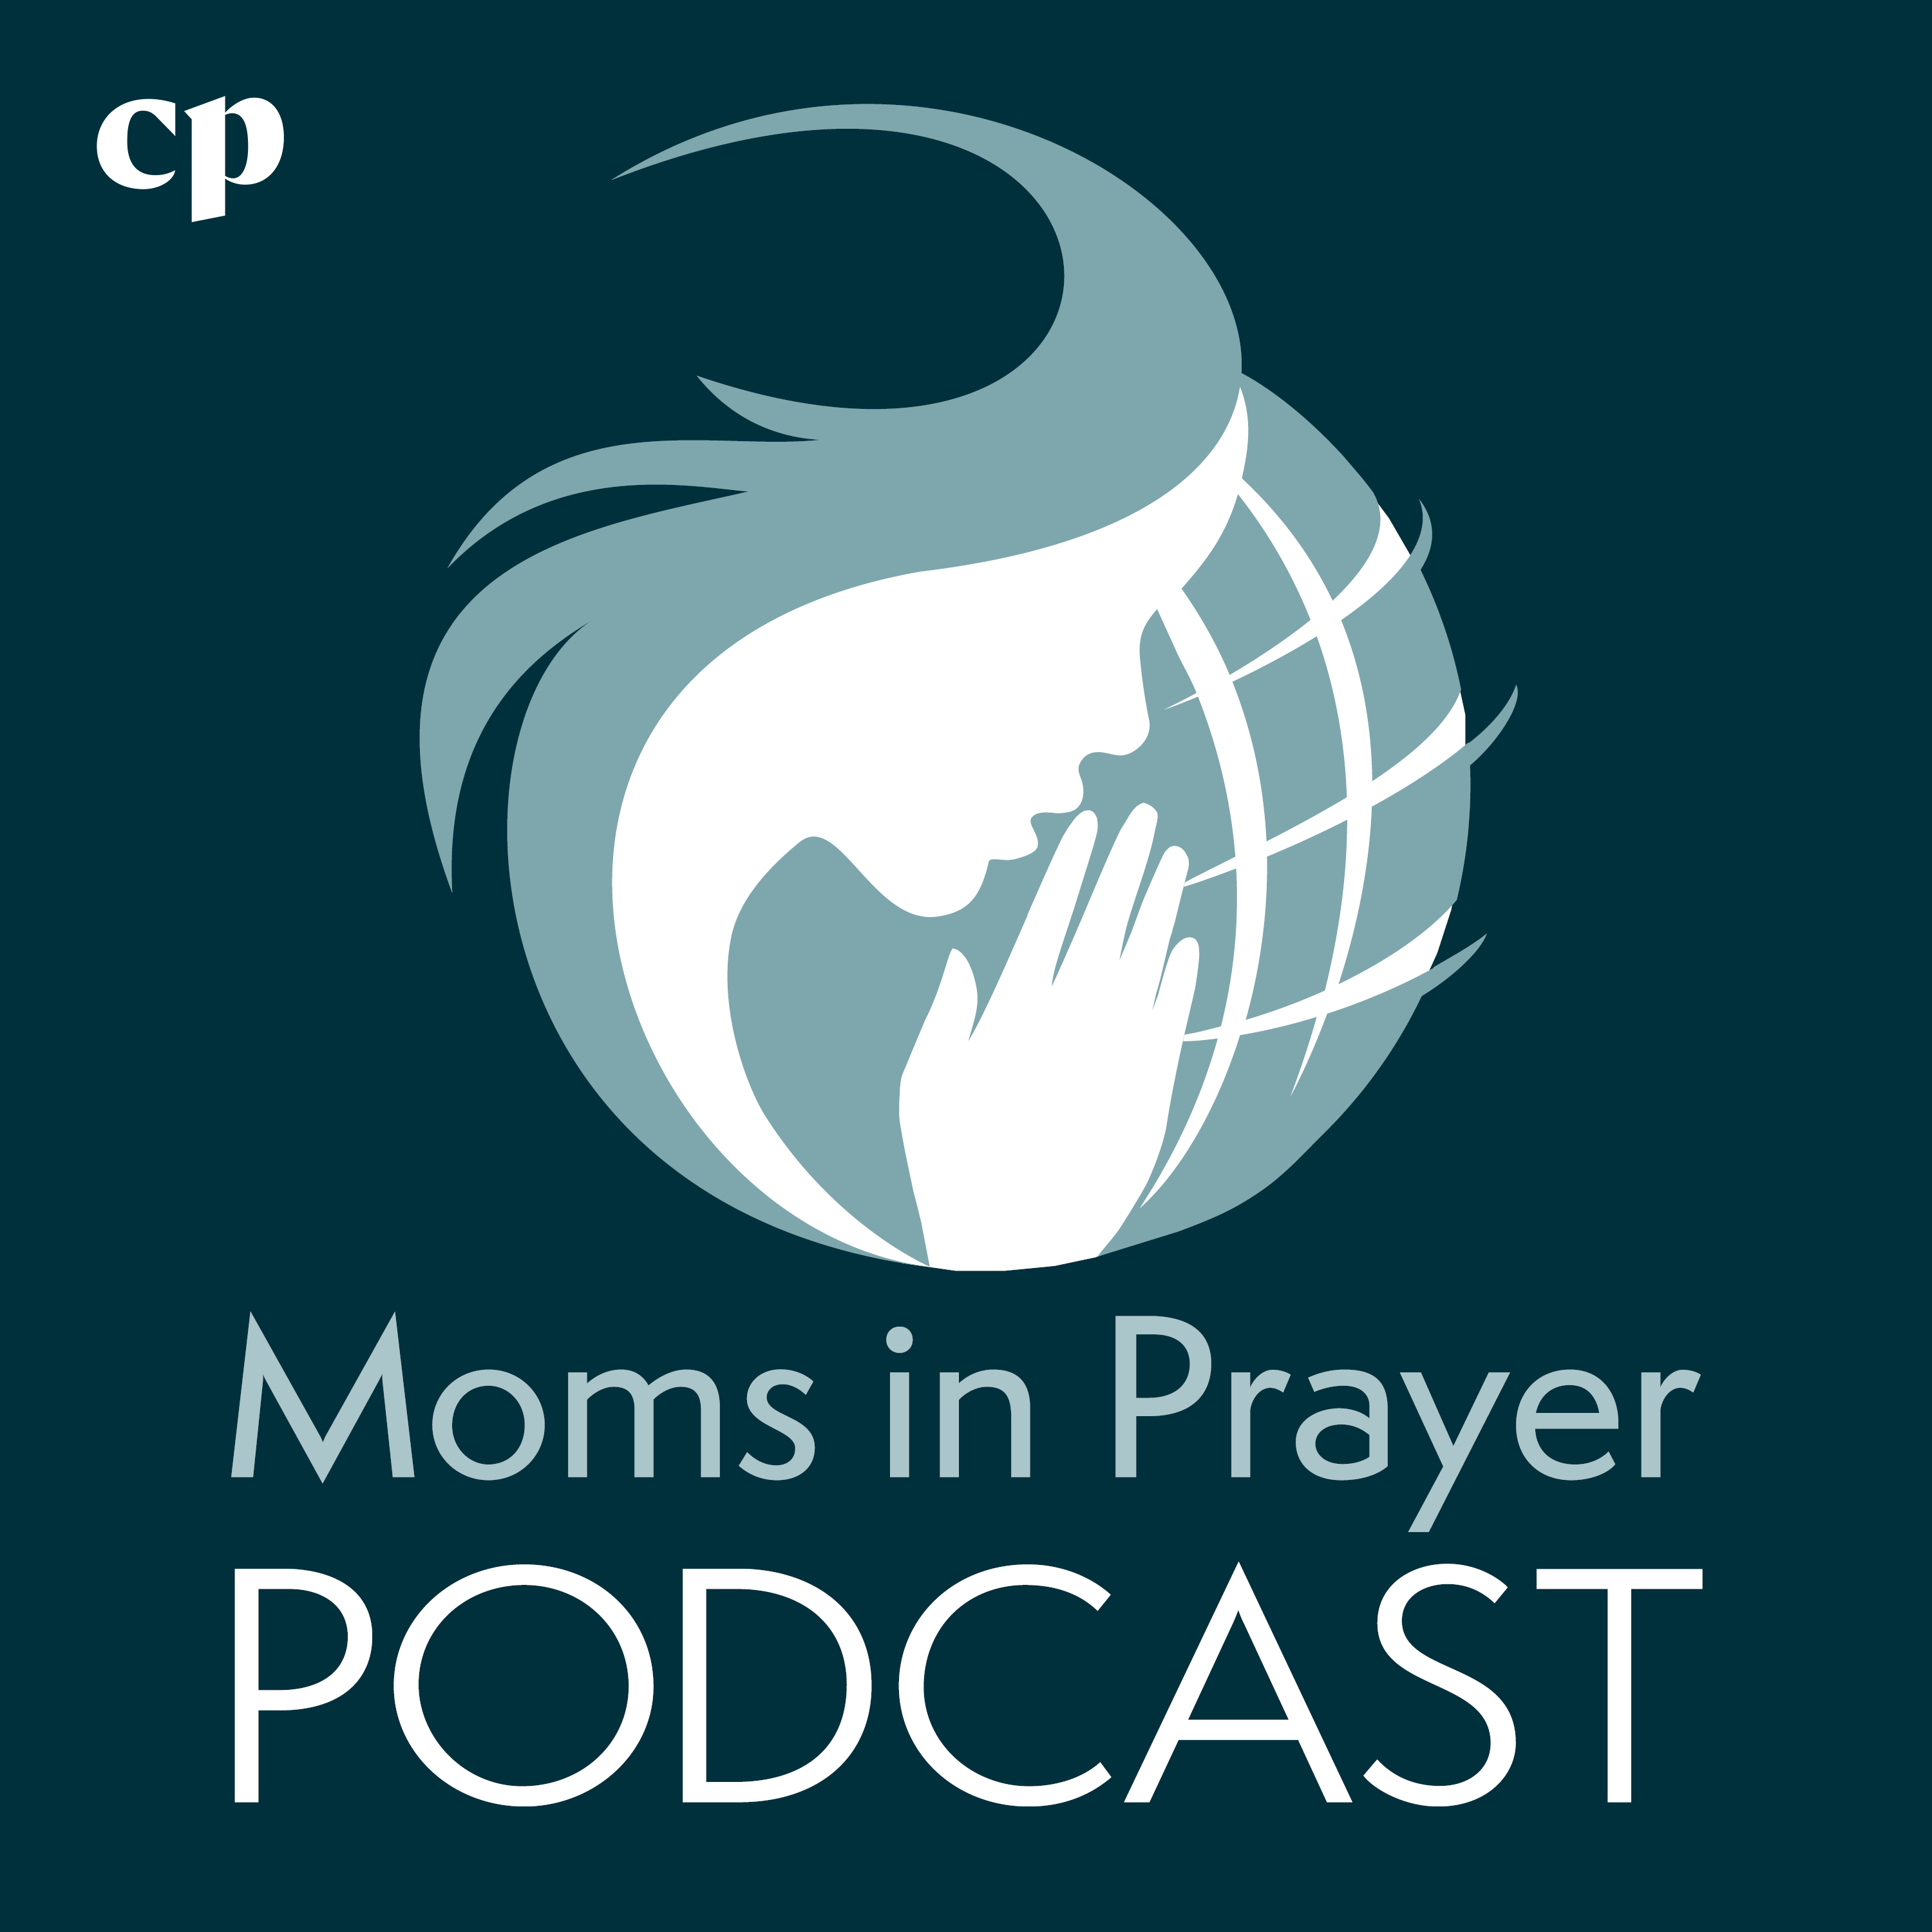 Episode 215 - Praying Moms & Heroes of Faith with Jasmine Alnutt